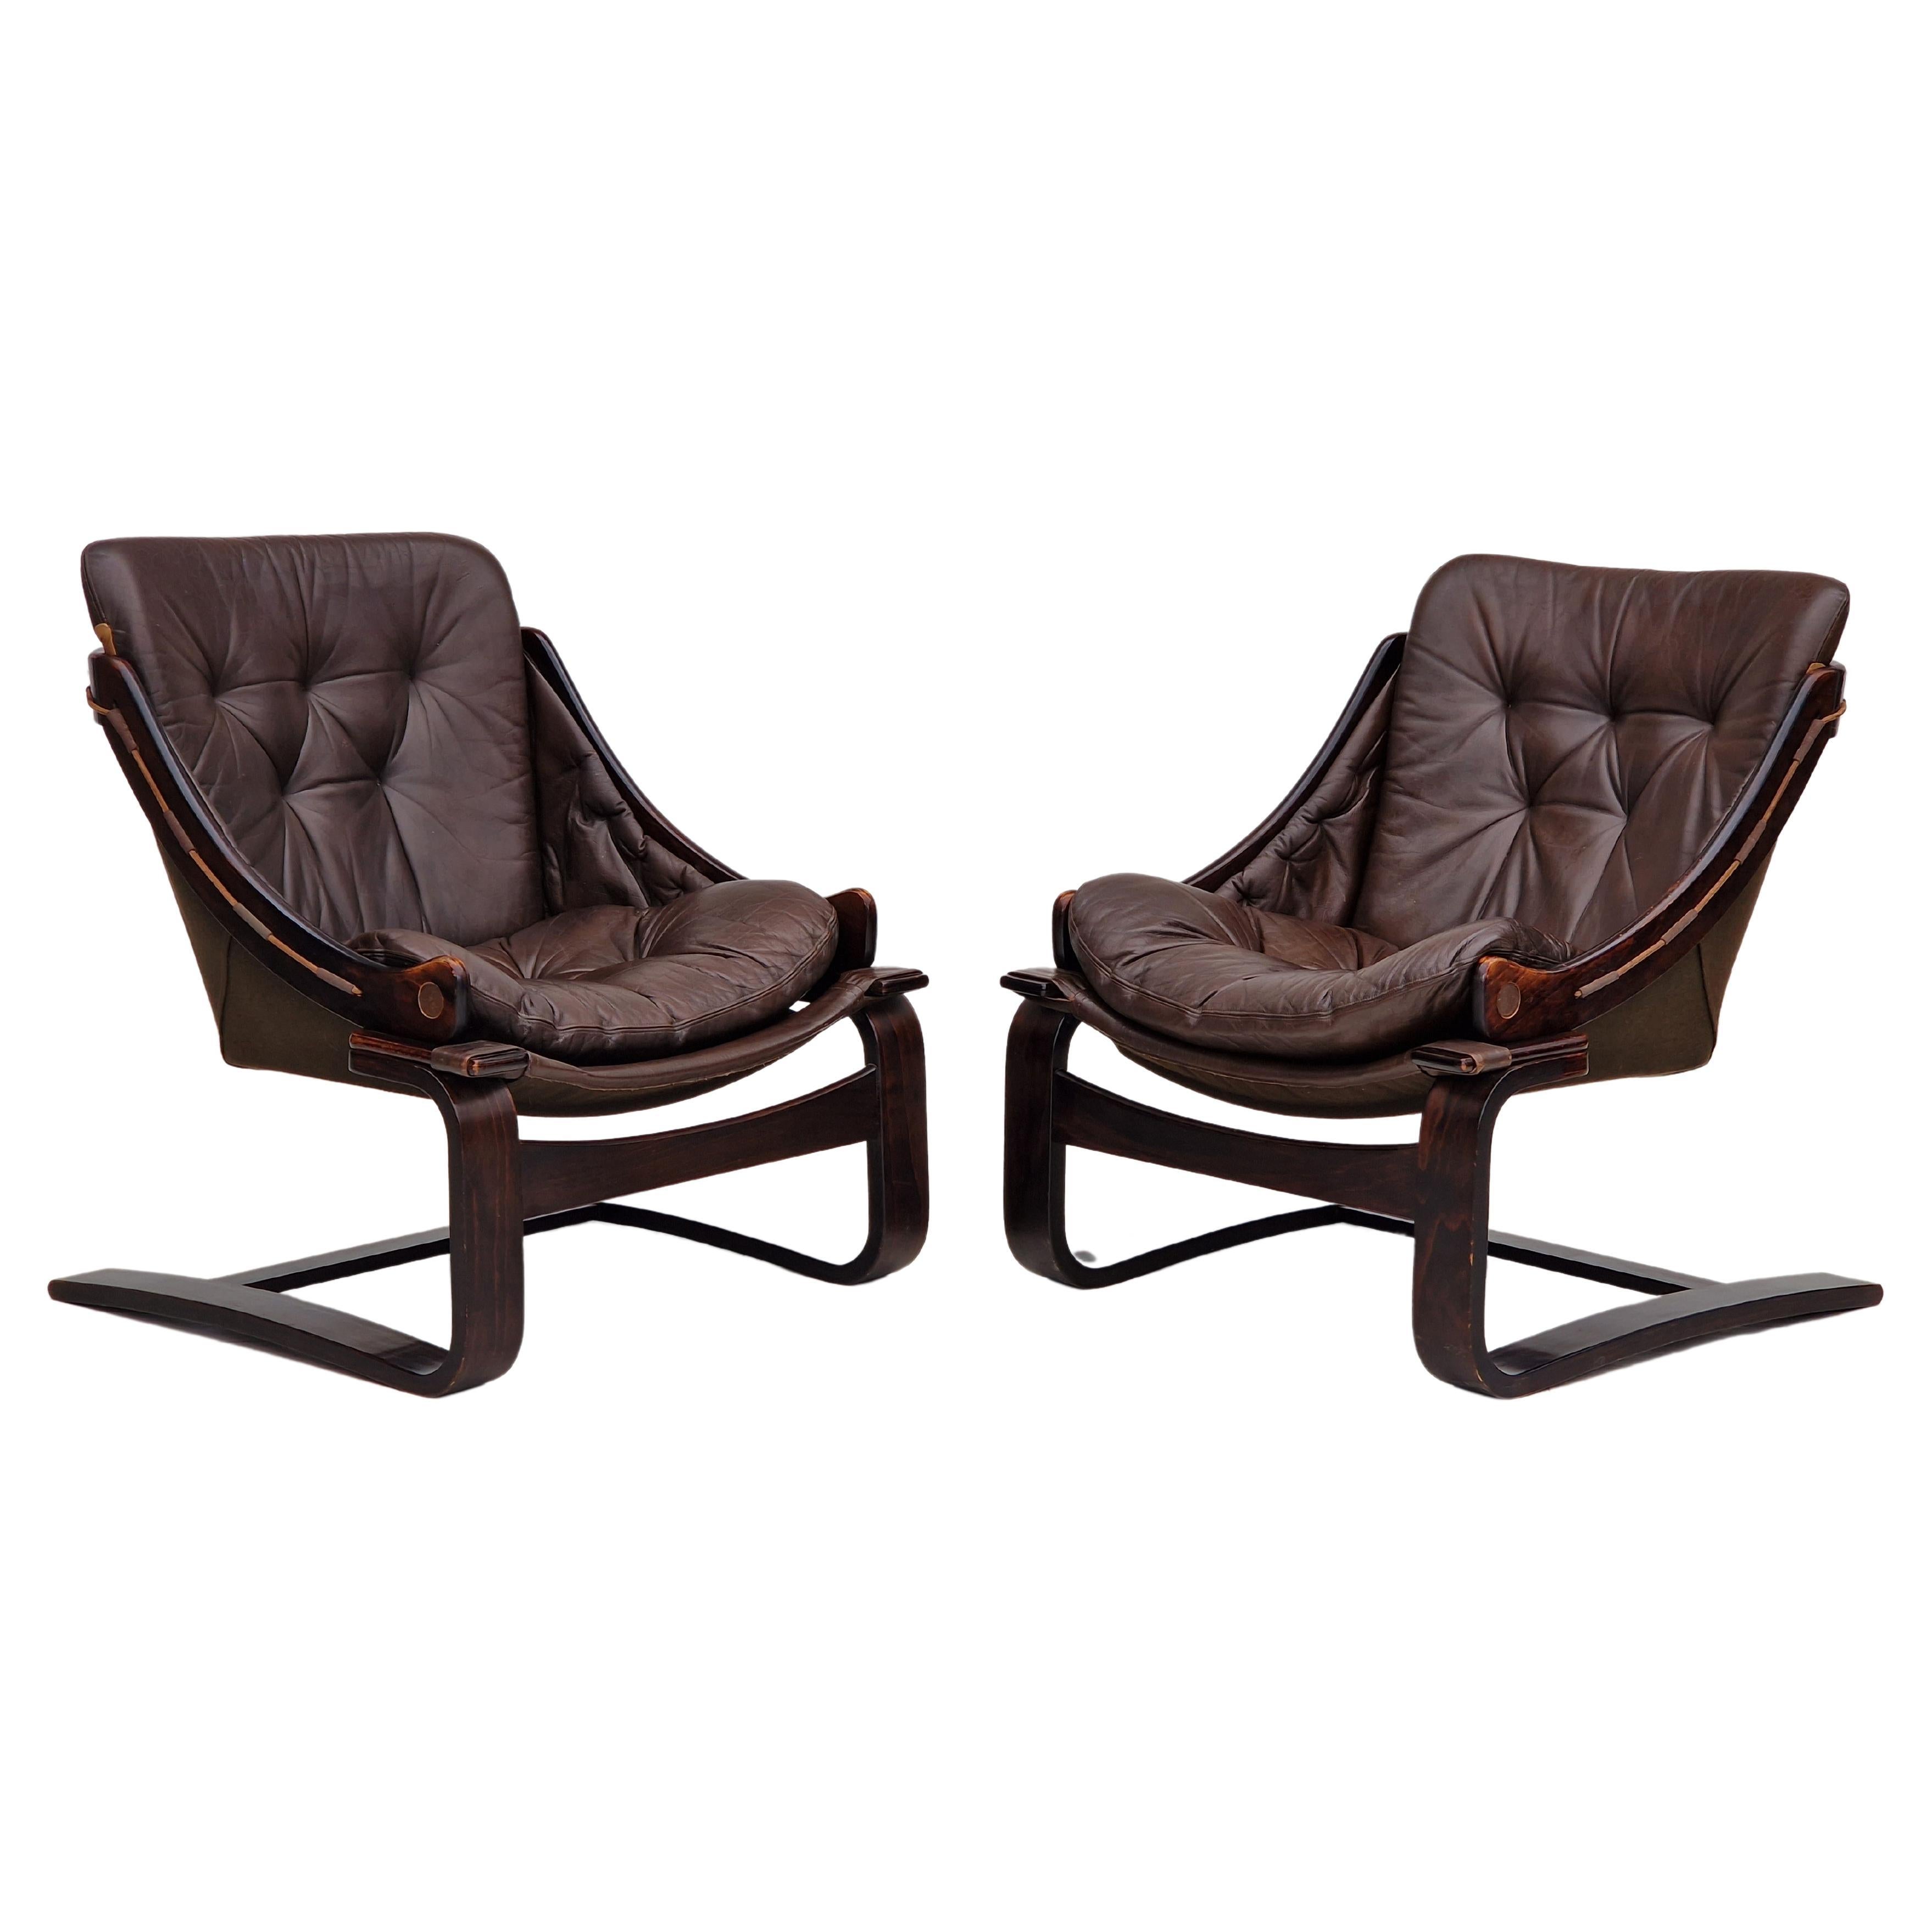 1970s, Pair of Two Lounge Chair by Ake Fribytter for Nelo Sweden For Sale